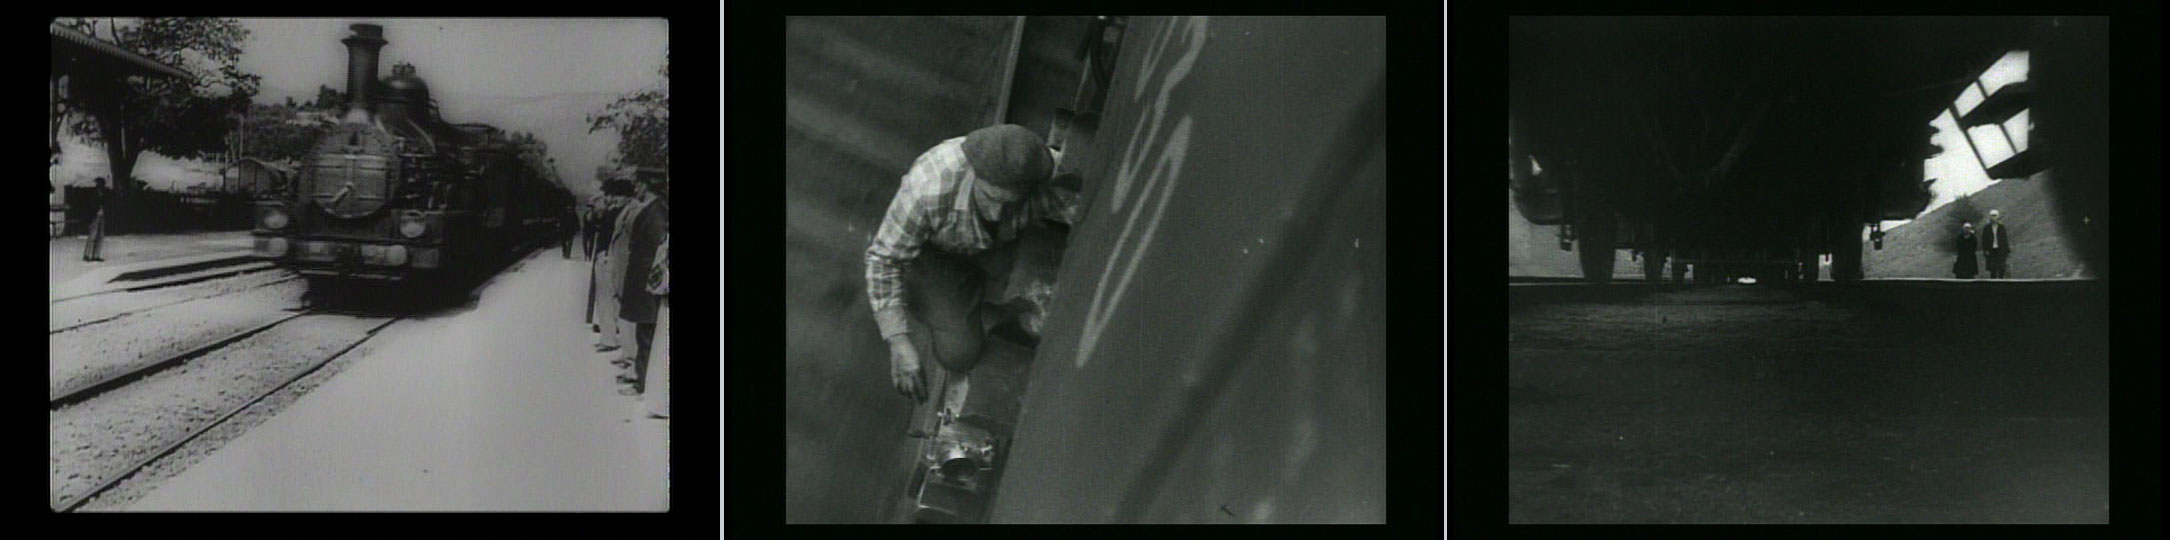 three till images: locomotive, man in beret crouching next to a train car, undercarriage of a train car with two people in the background